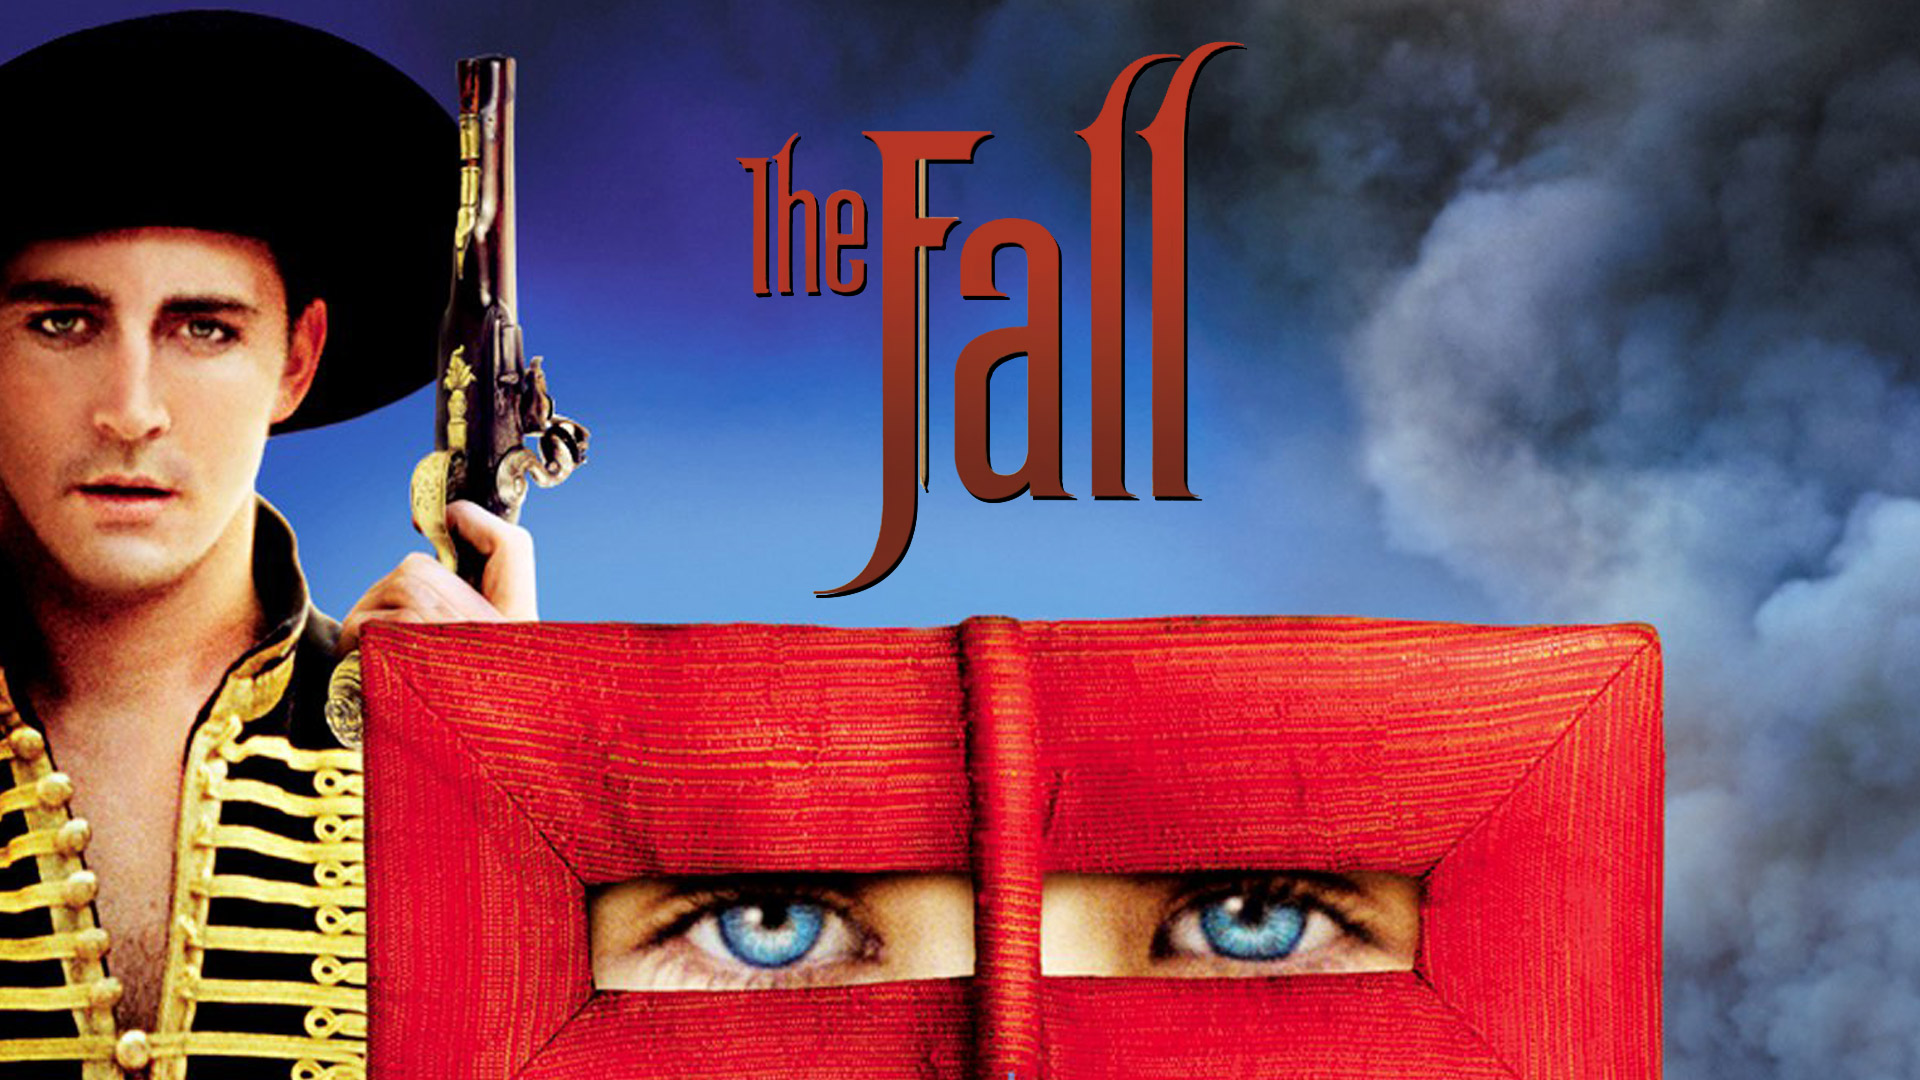 35 Facts about the movie The Fall - Facts.net